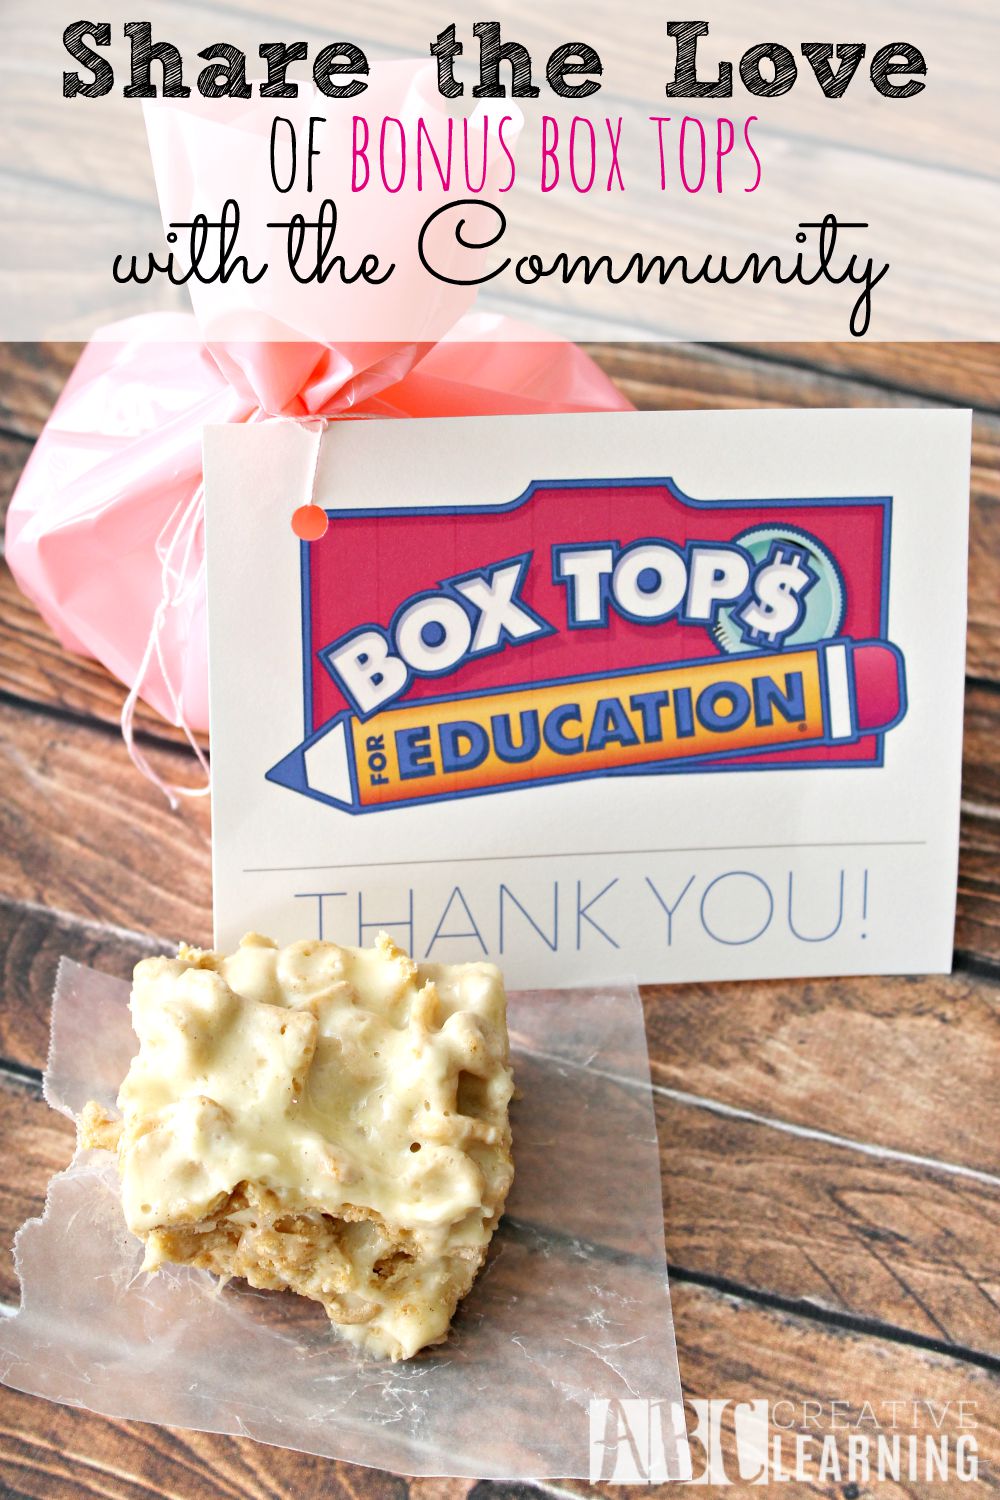 Share the Love of Bonus Box Tops with the Community